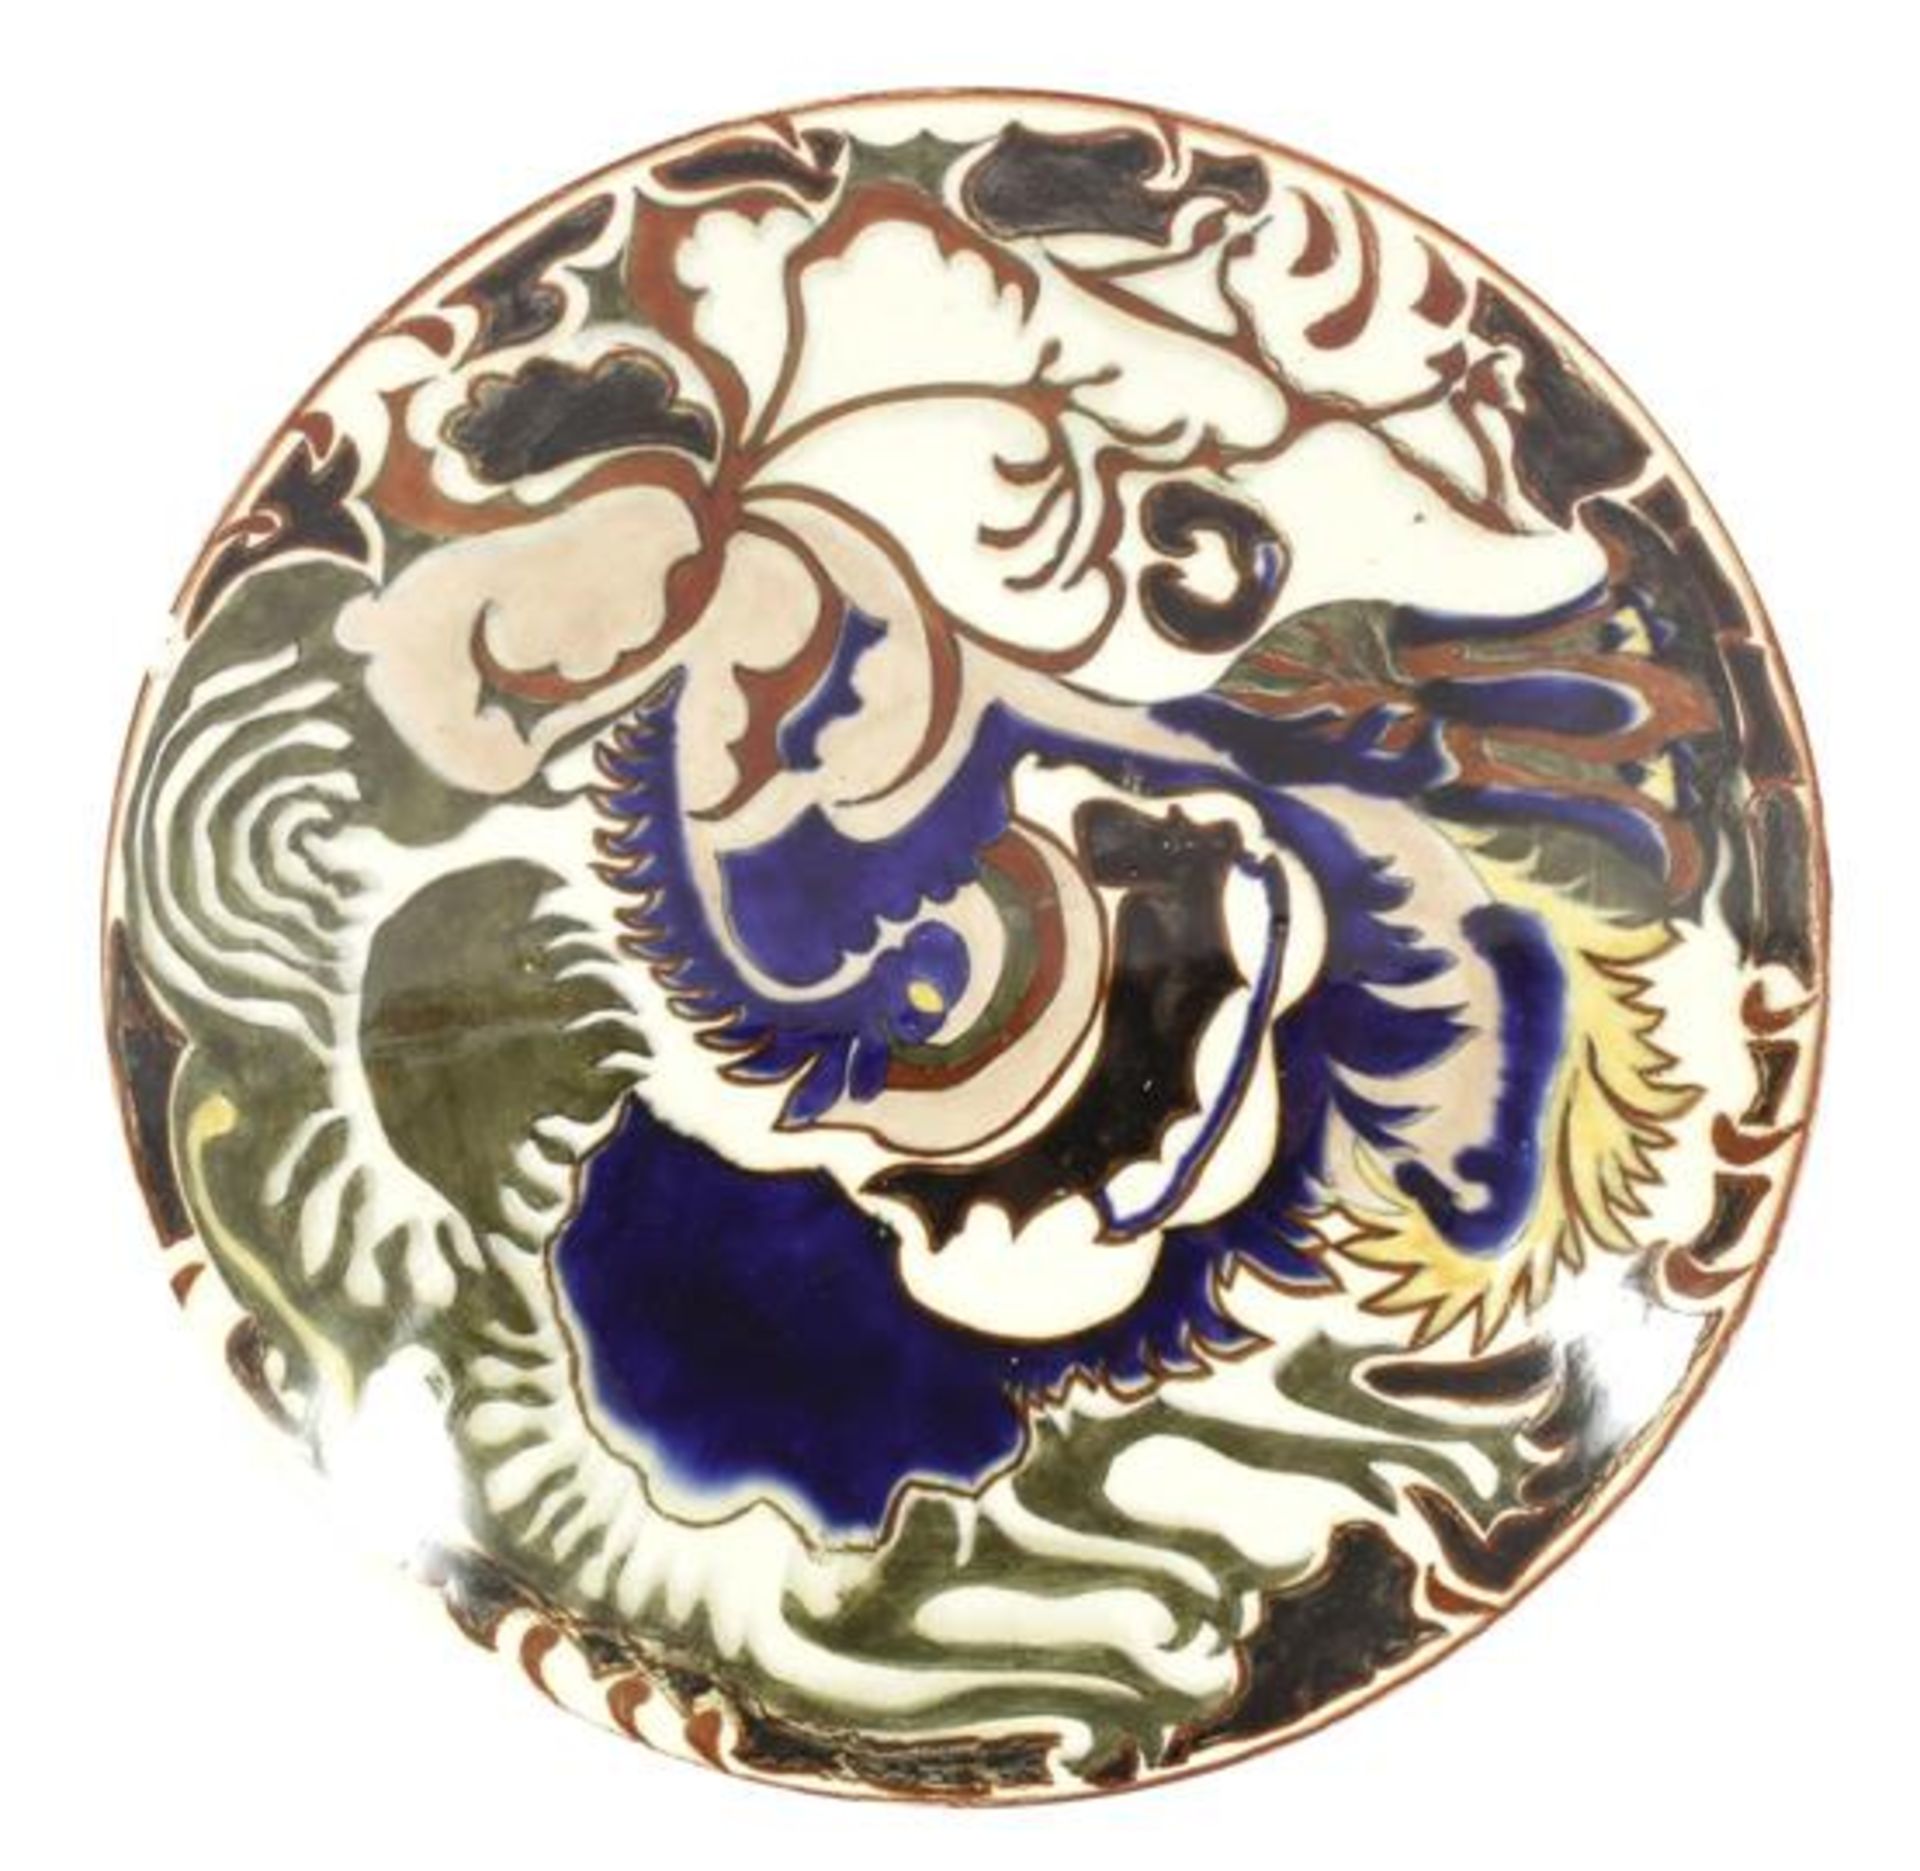 Rozenburg Den Haag pottery dish with polychrome decor, marked and year mark 1887, 23 cm diameter (